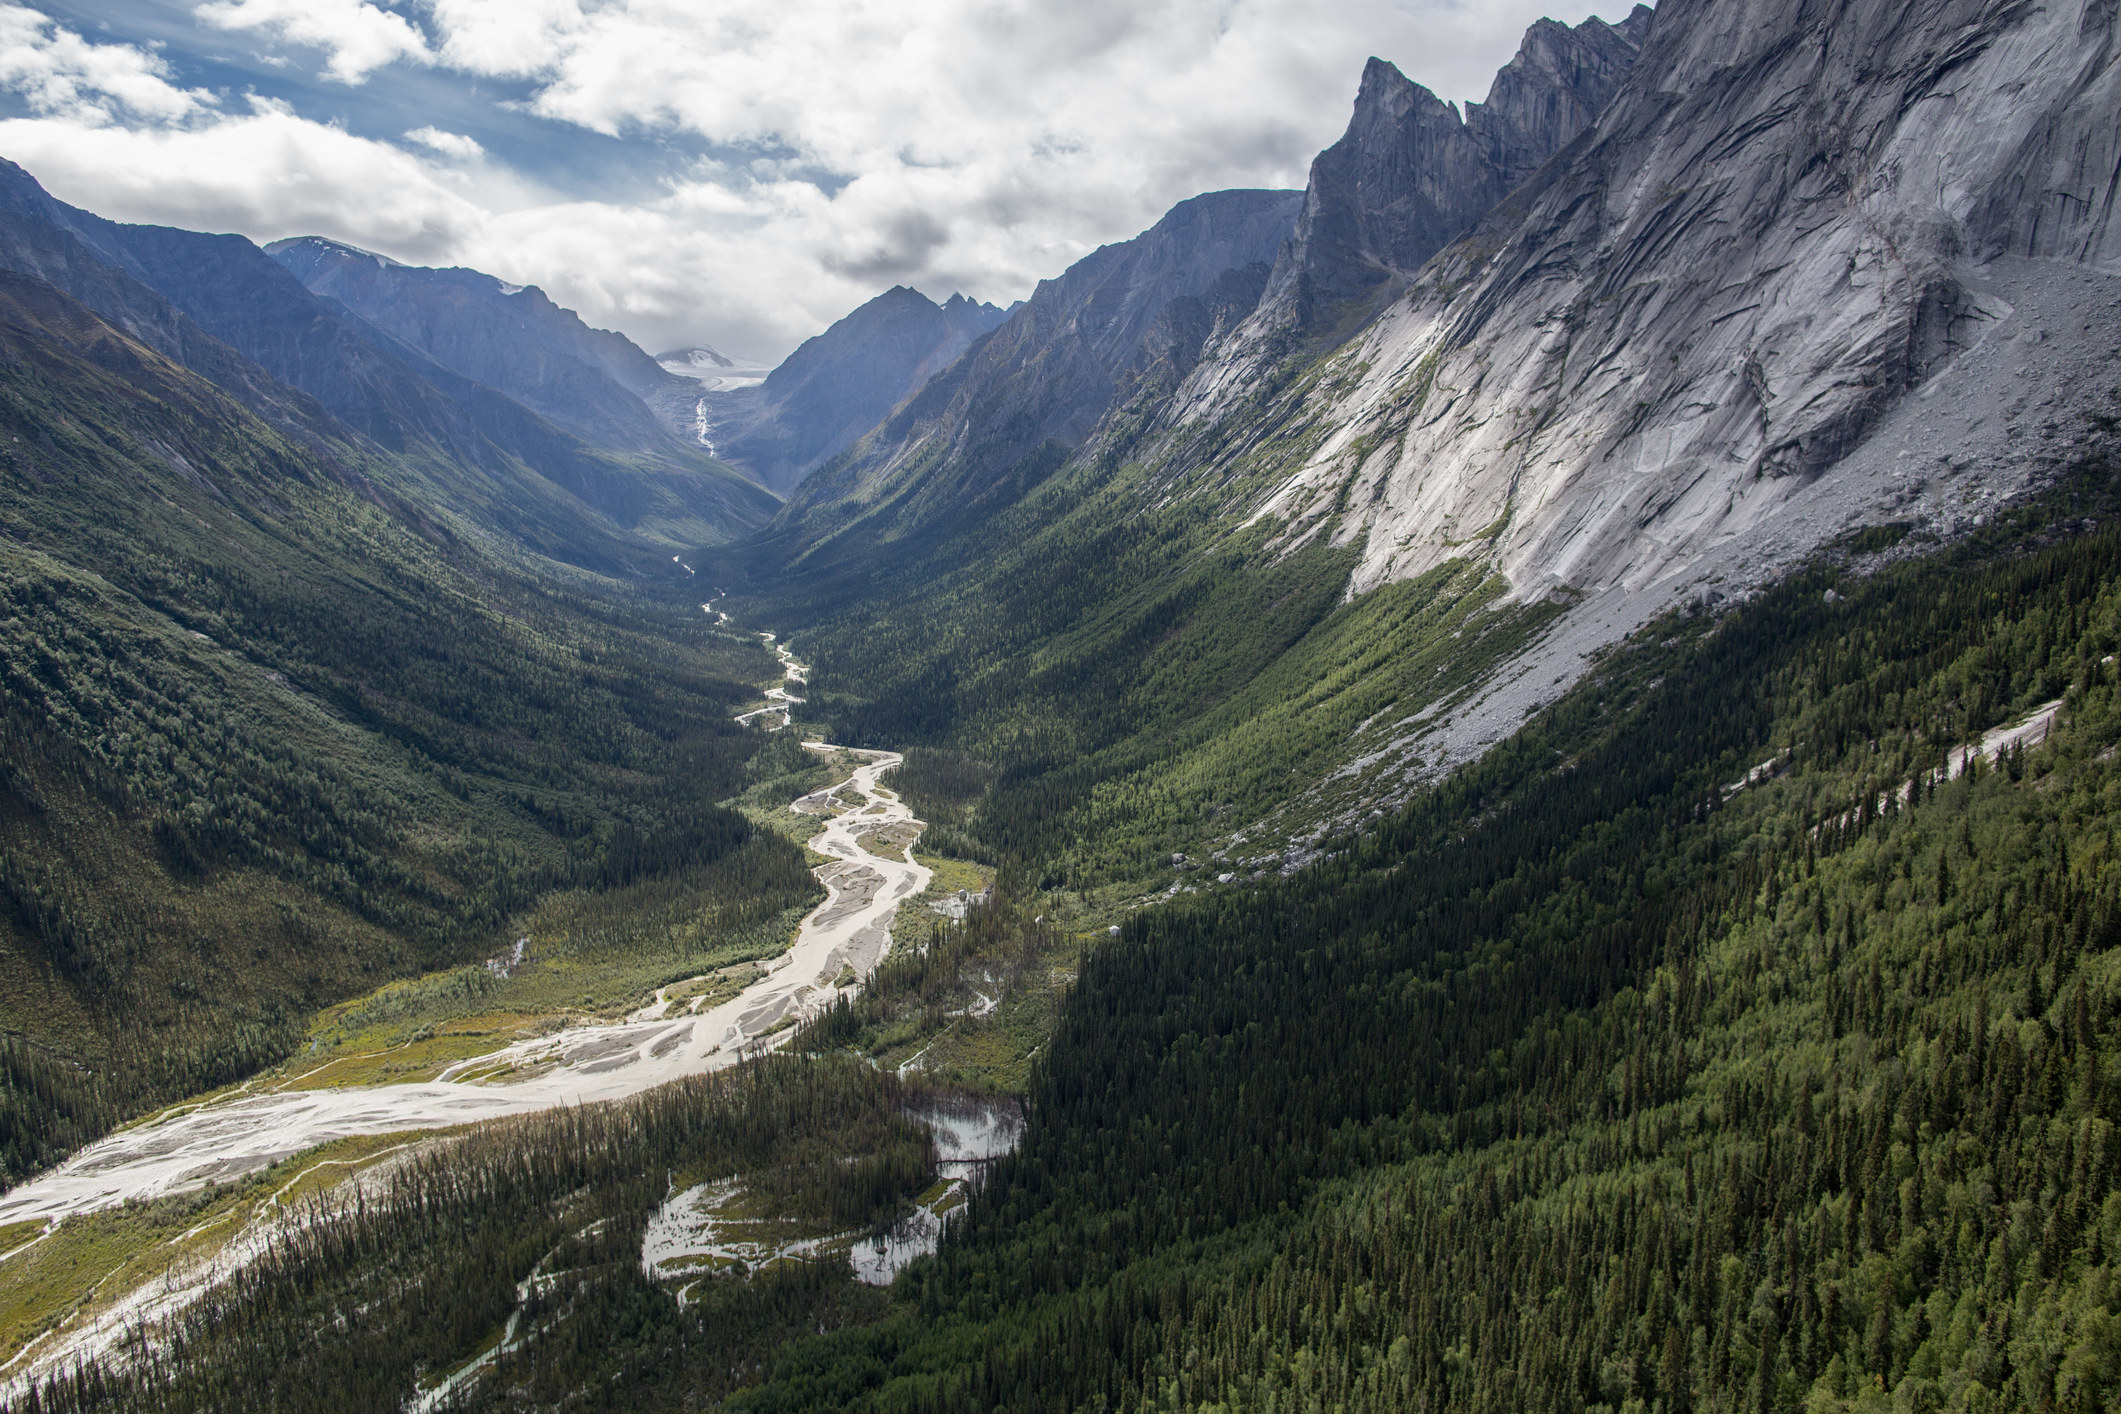 Nahanni National Park Reserve, in the Northwest Territories, Canada